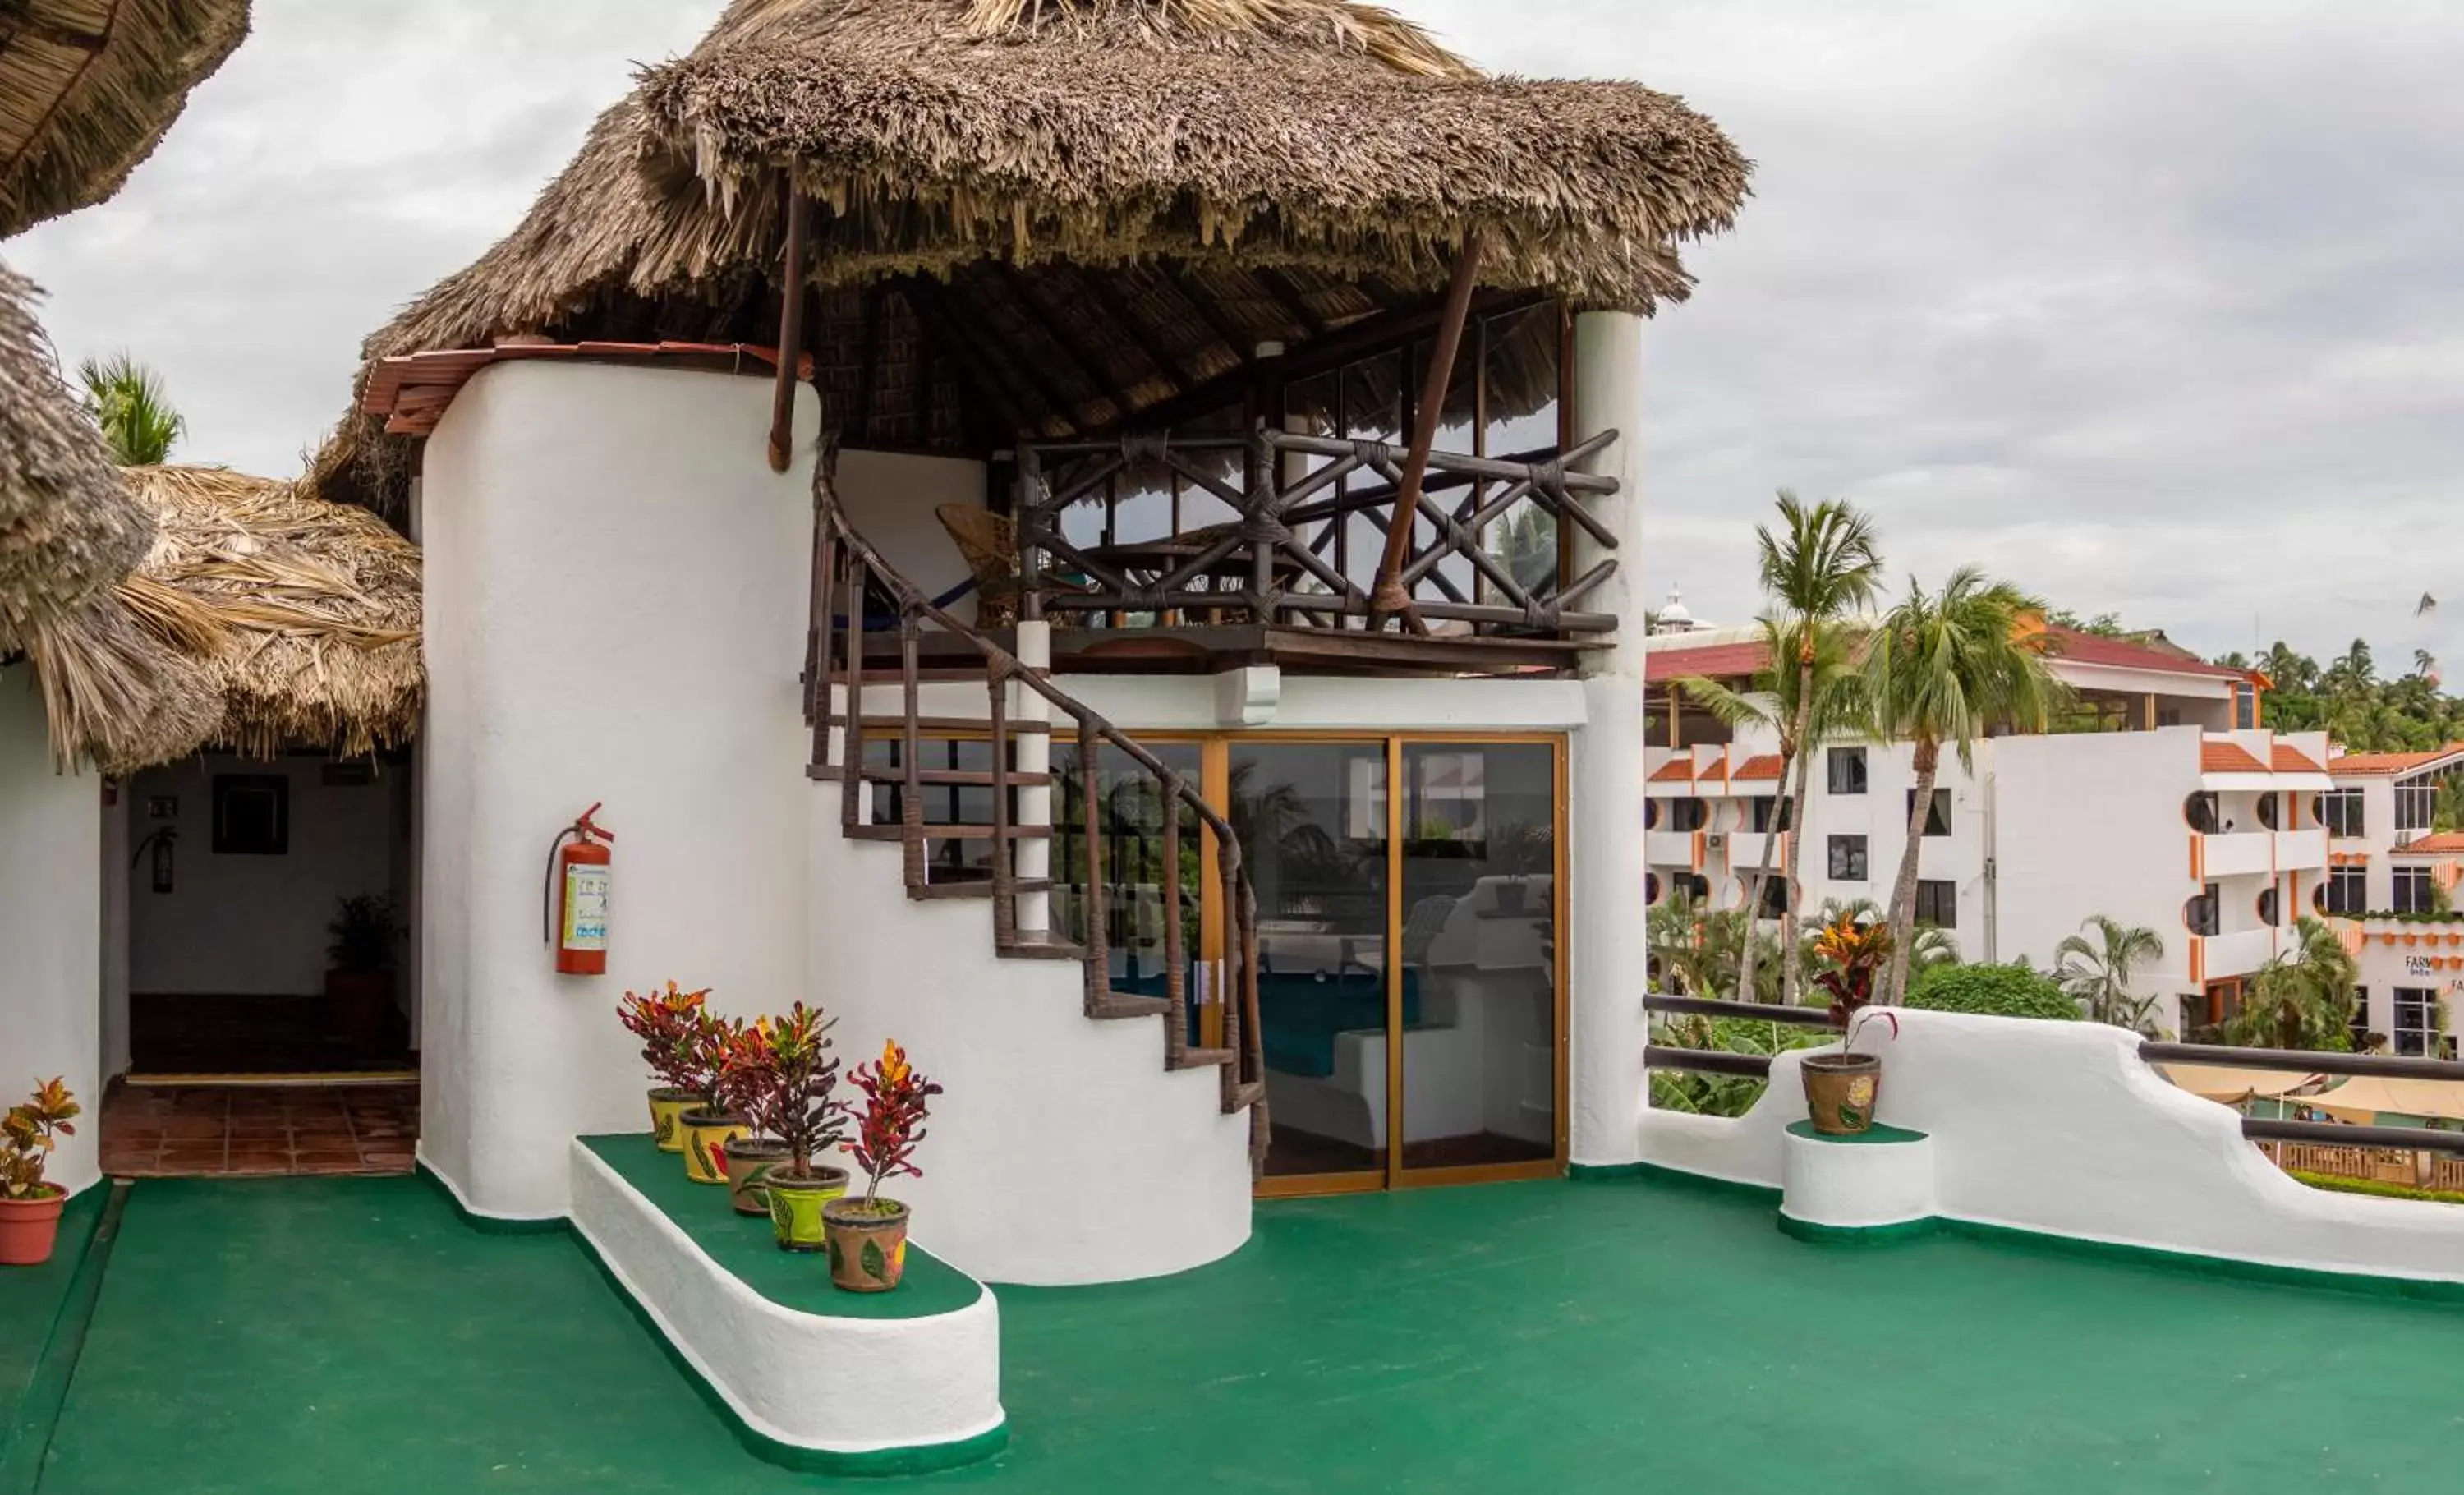 Off site in Hotel Bungalows Acuario